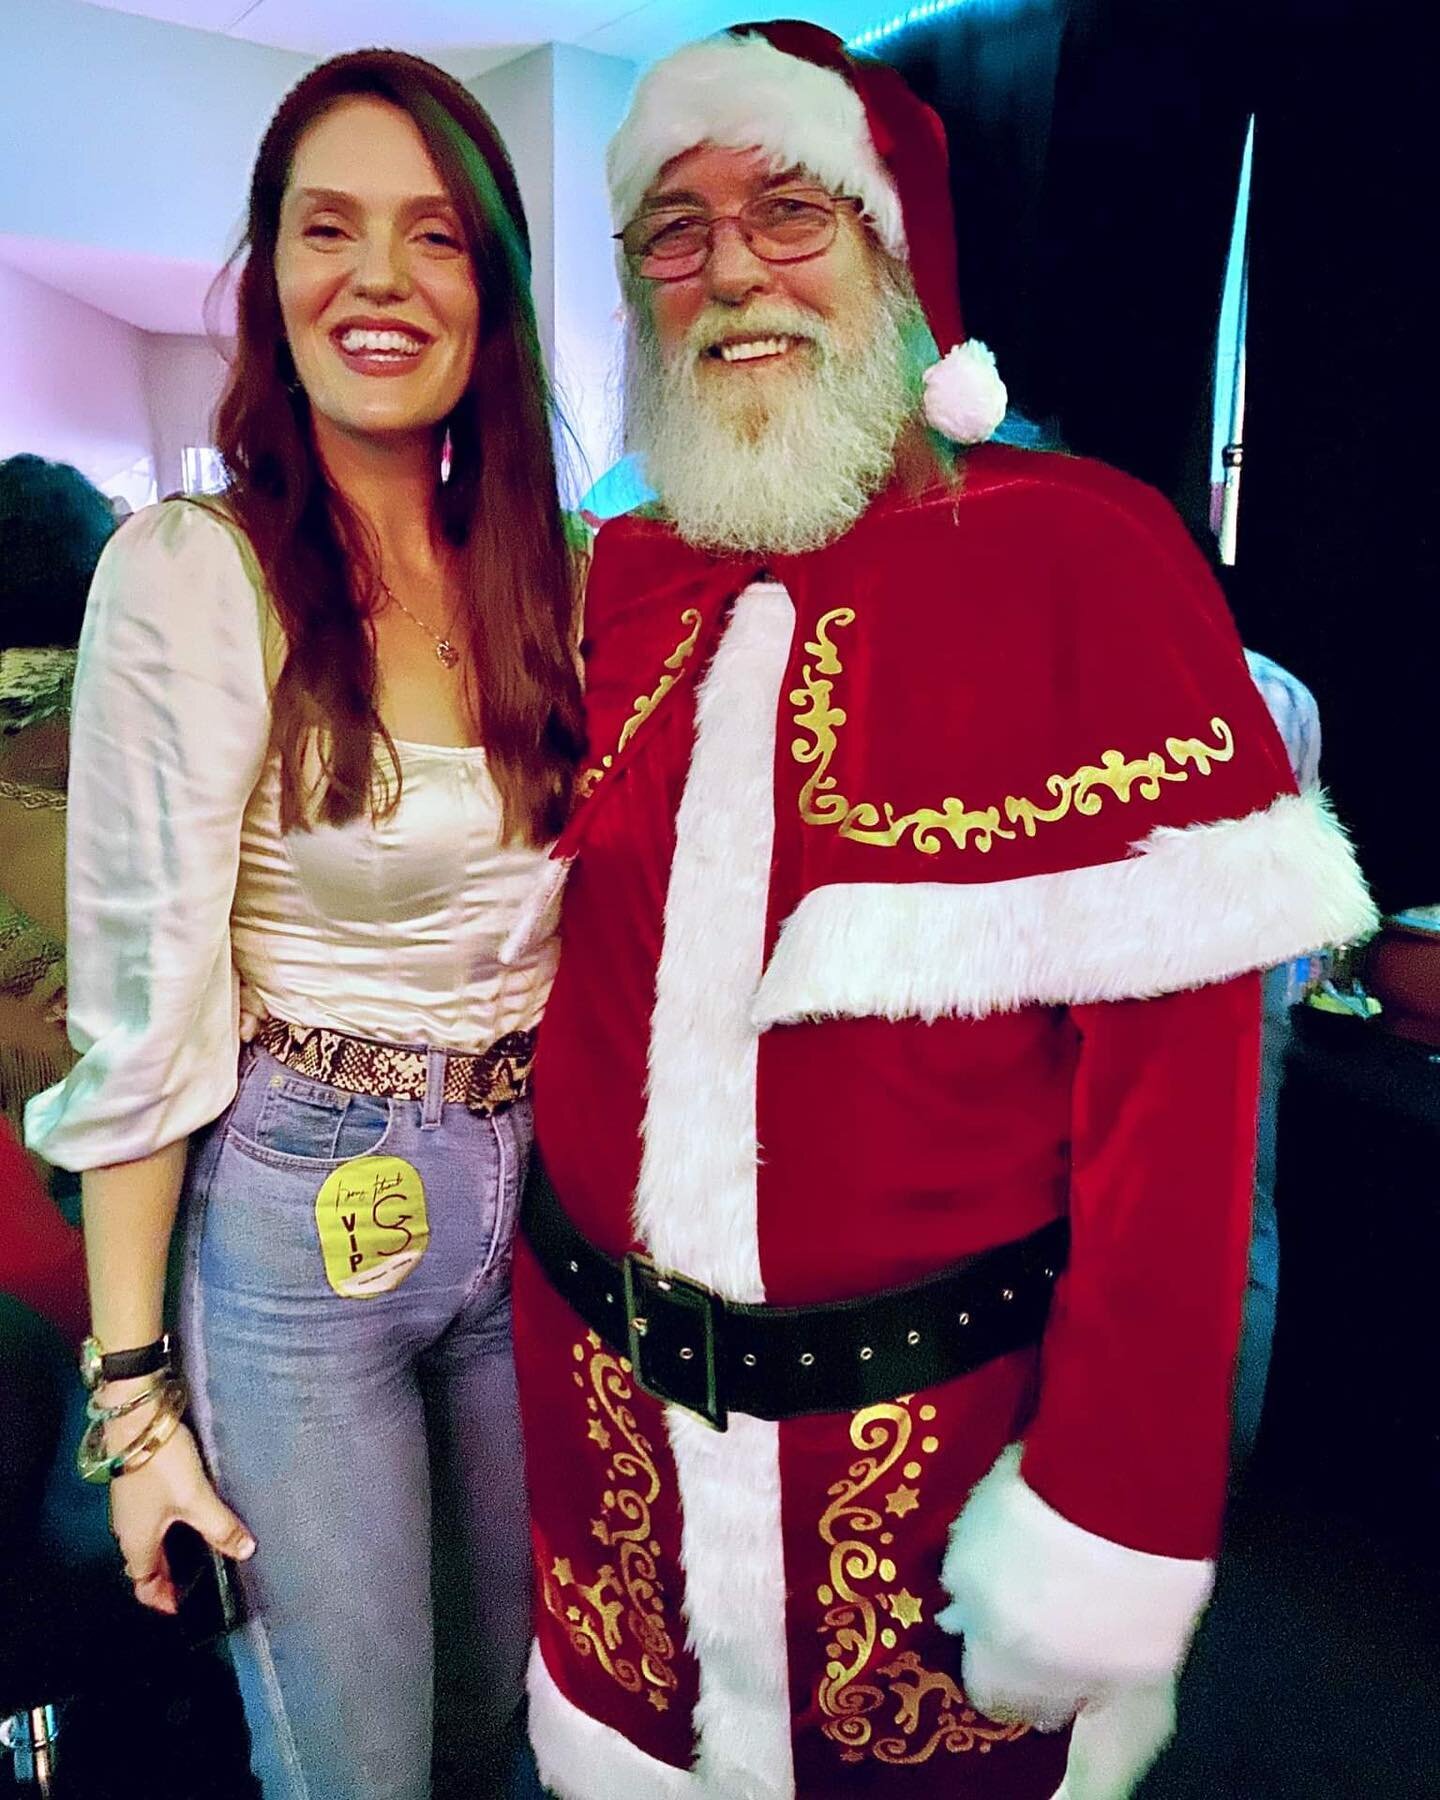 🤠 Paul is the bessst!! He does sound for George Strait and always is so kind to let us sneak in back stage. Throwback to Christmas time when he went all out. Thank you Paul for being you and mom for knowing Paul @1_holdoutranch and taking me along ?